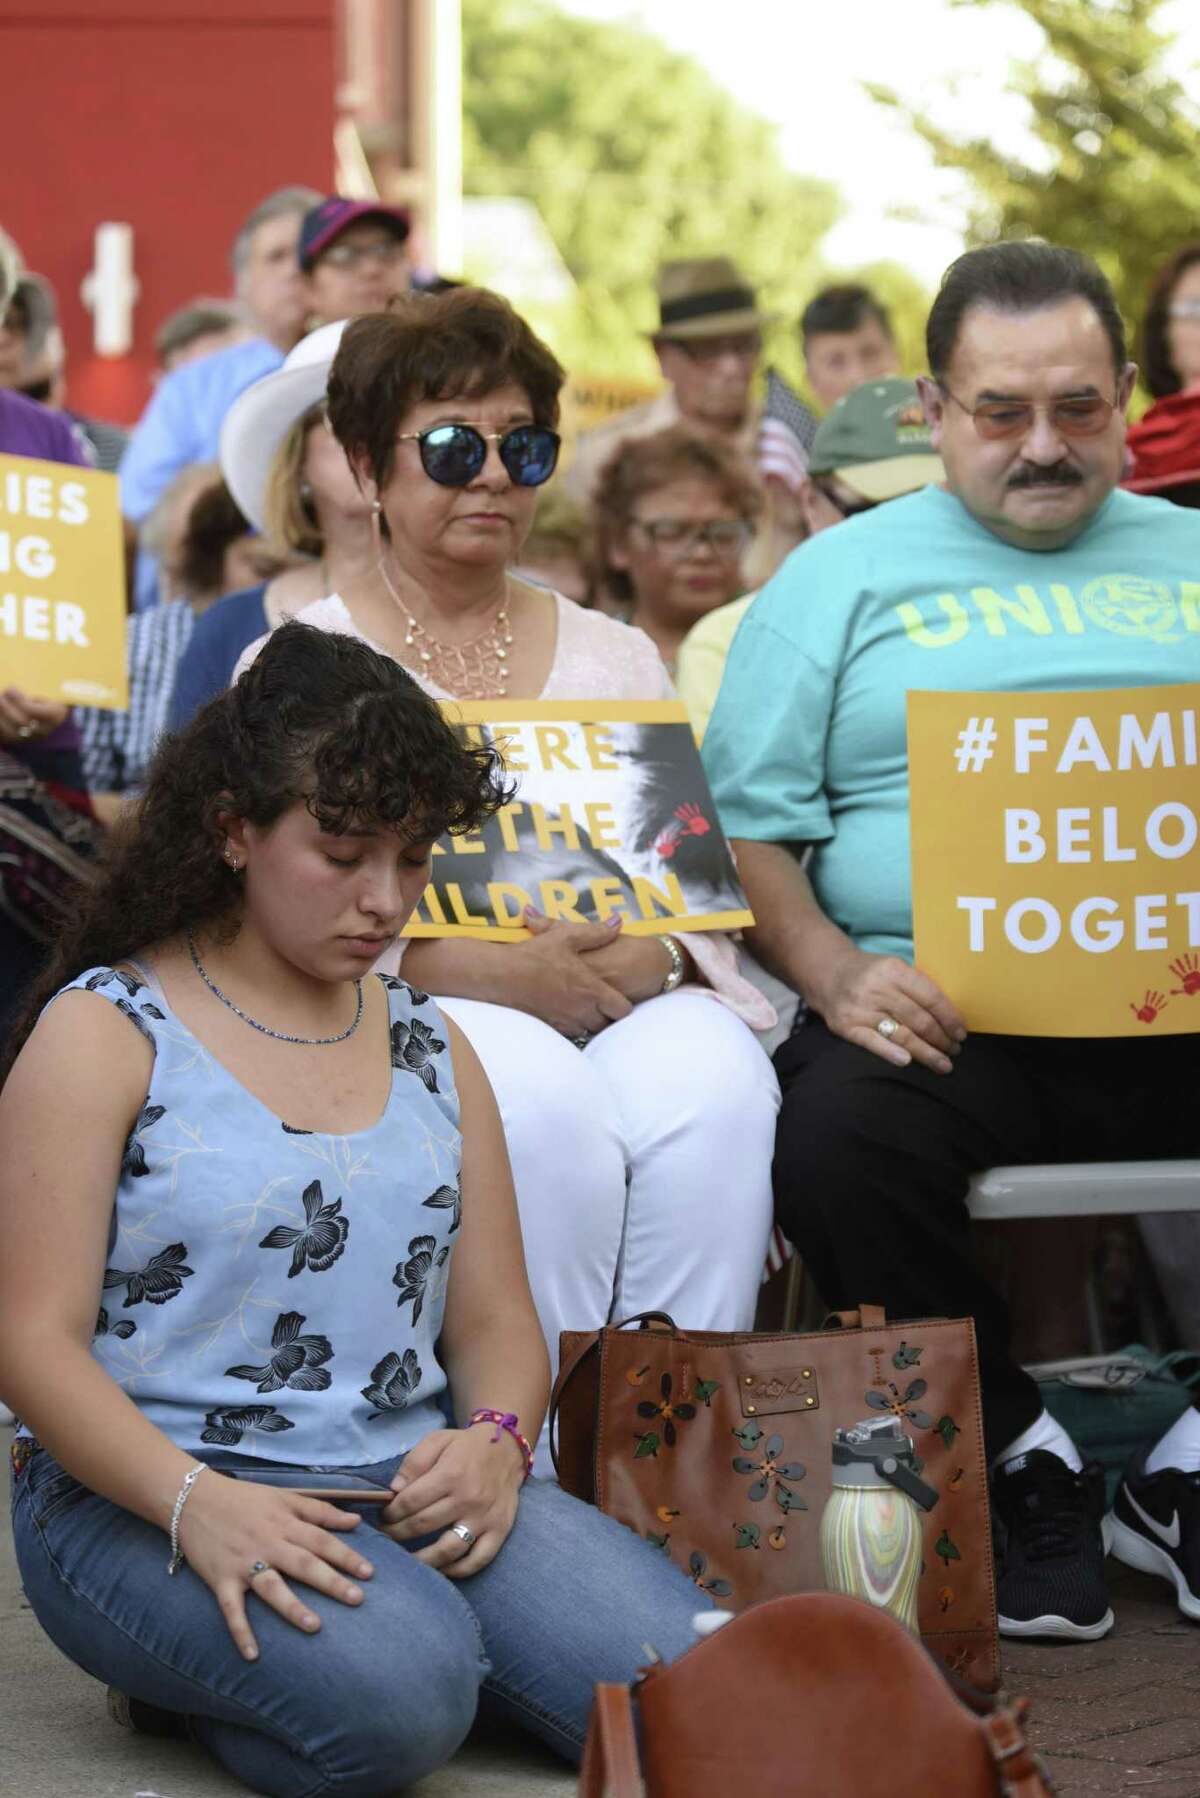 People pray during a rally in support of immigrant children and families, led by U.S. Rep. Joaquin Castro, the Texas Organizing Project, MALC, RAICES and other groups, at the Guadalupe Cultural Center on Thursday, May 31, 2018.